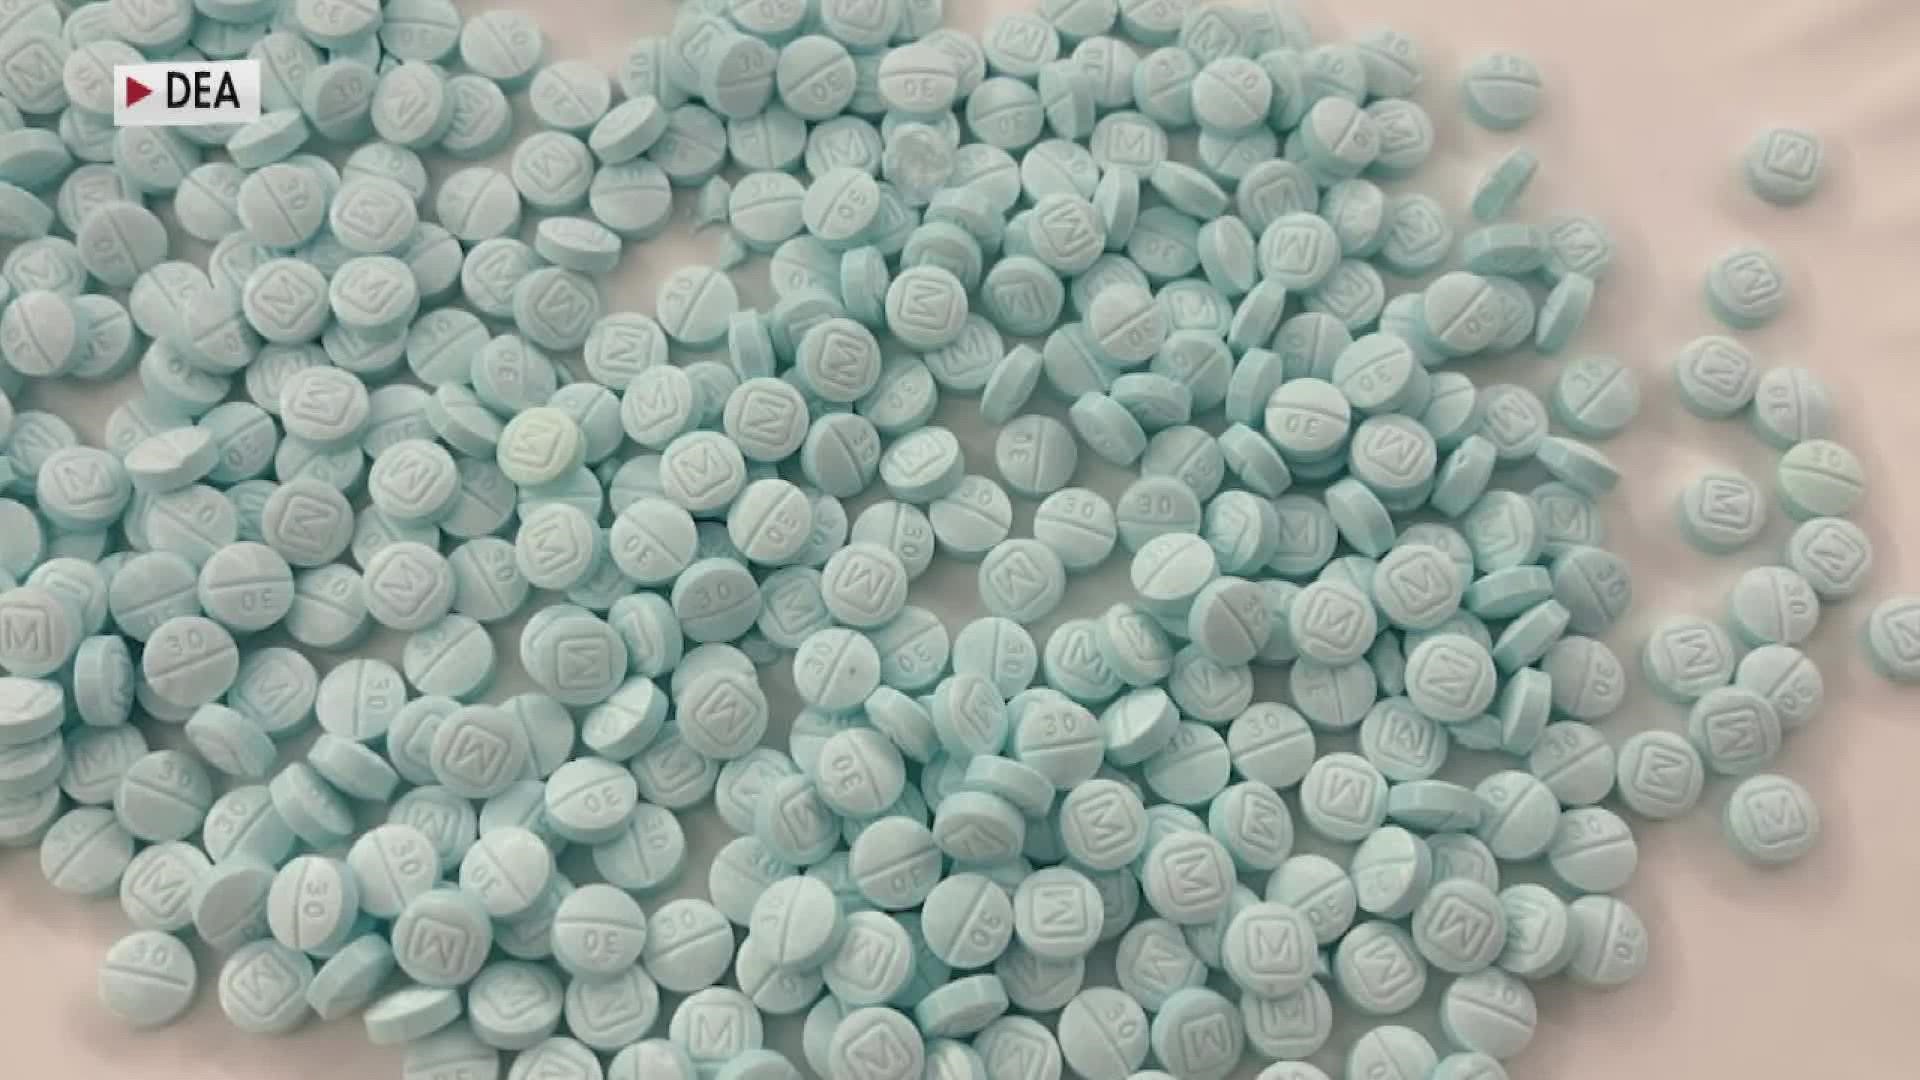 An increasing number of pills laced with fentanyl are being produced in the U.S.